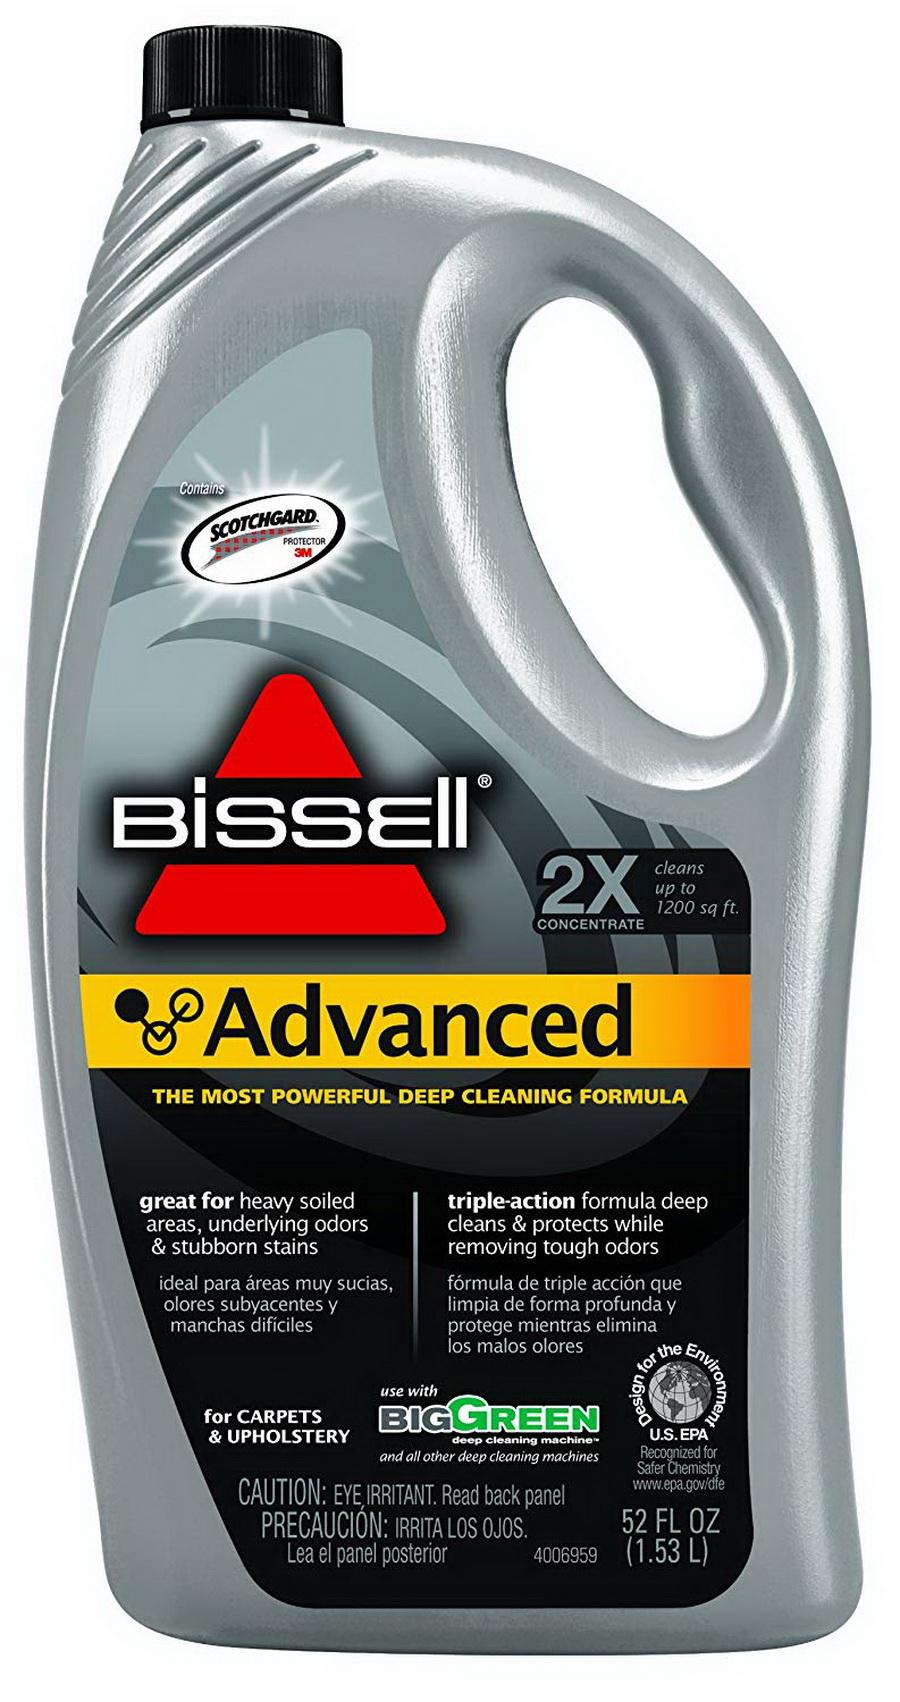 Bissell 49G5 32 Oz 2x Advanced Formula Triple Action Cleaning